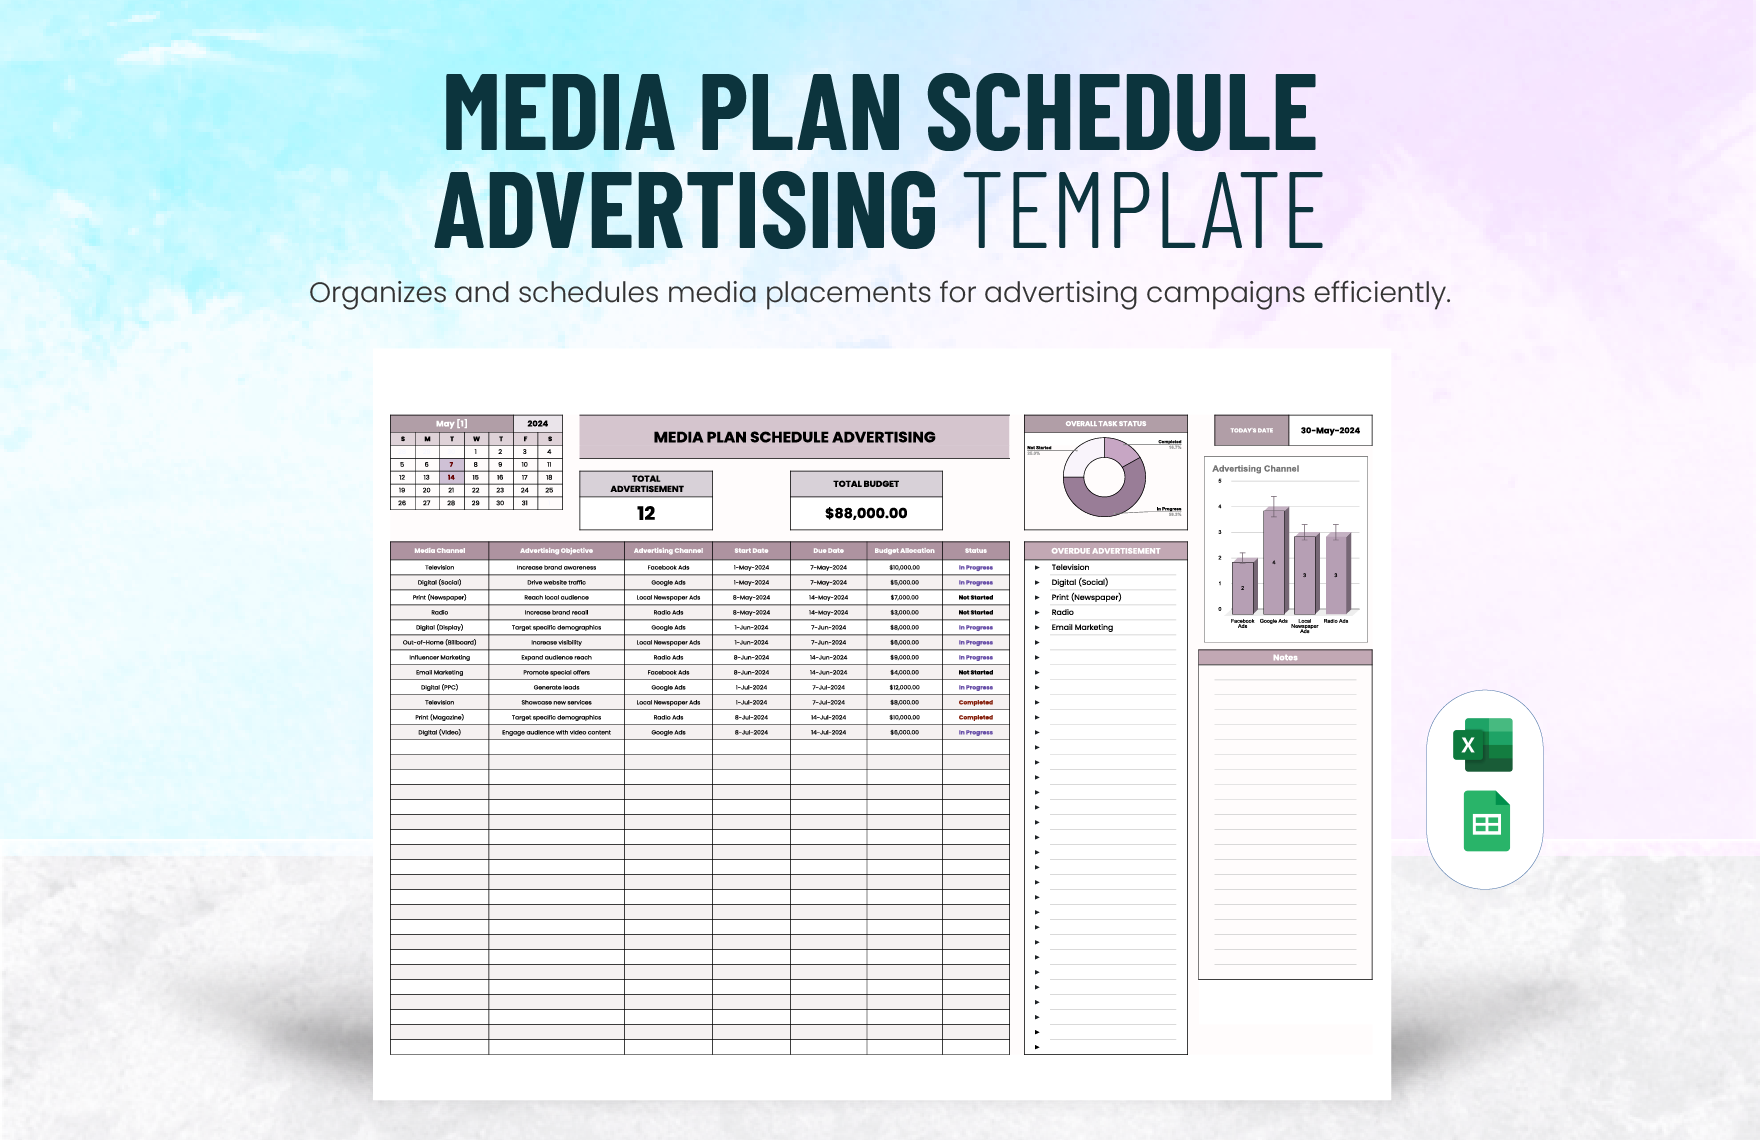 Media Plan Schedule Advertising Template in Excel, Google Sheets